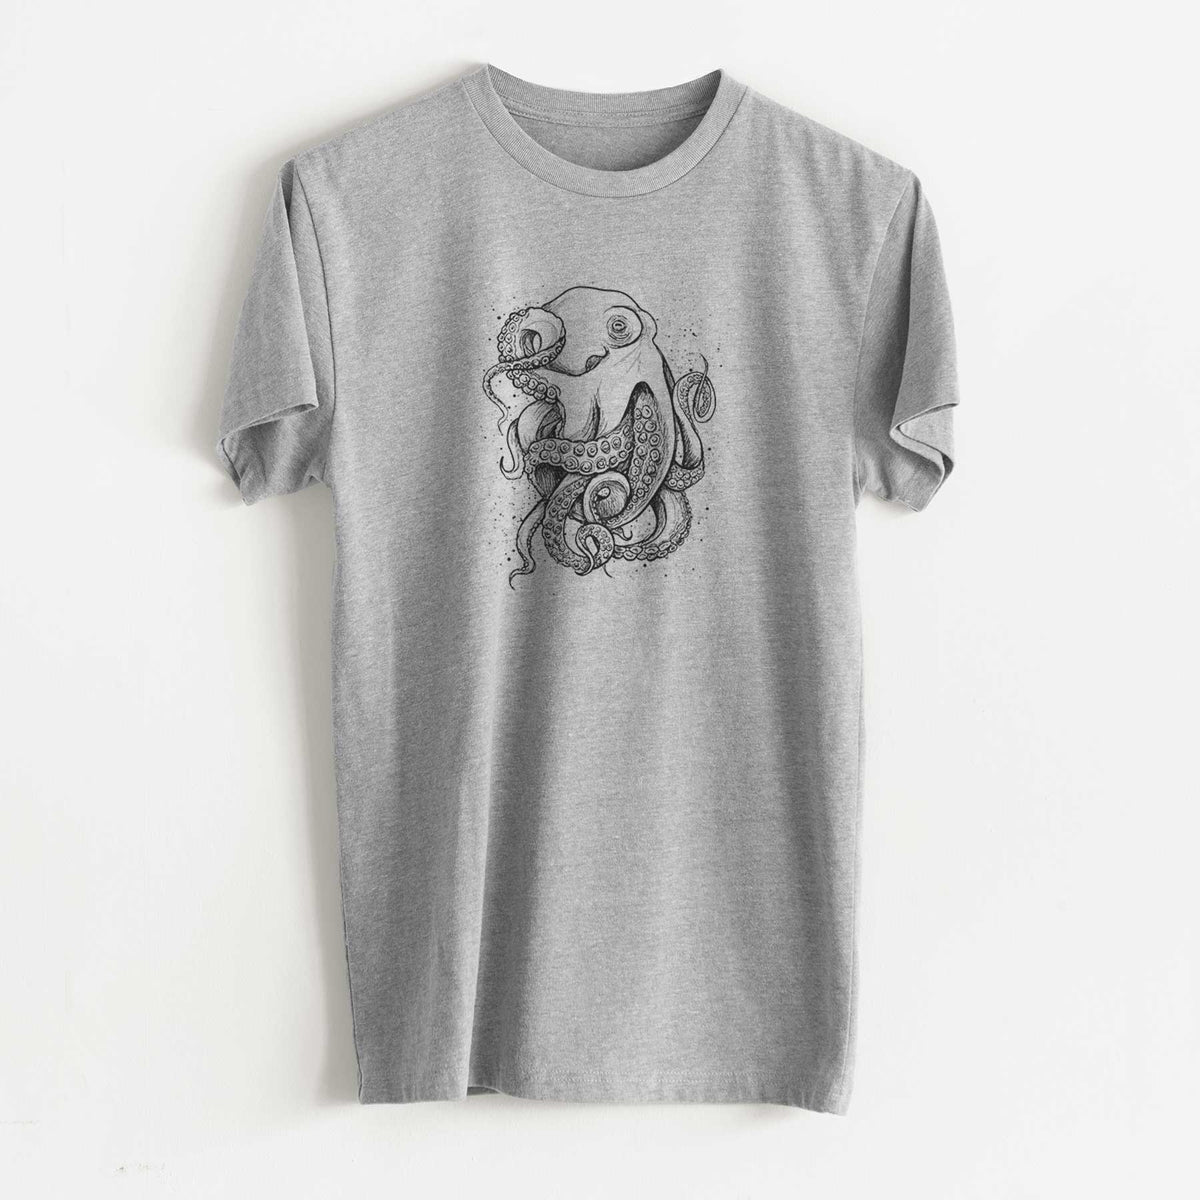 Octopus Vulgaris - Common Octopus - Unisex Recycled Eco Tee  - CLOSEOUT - FINAL SALE